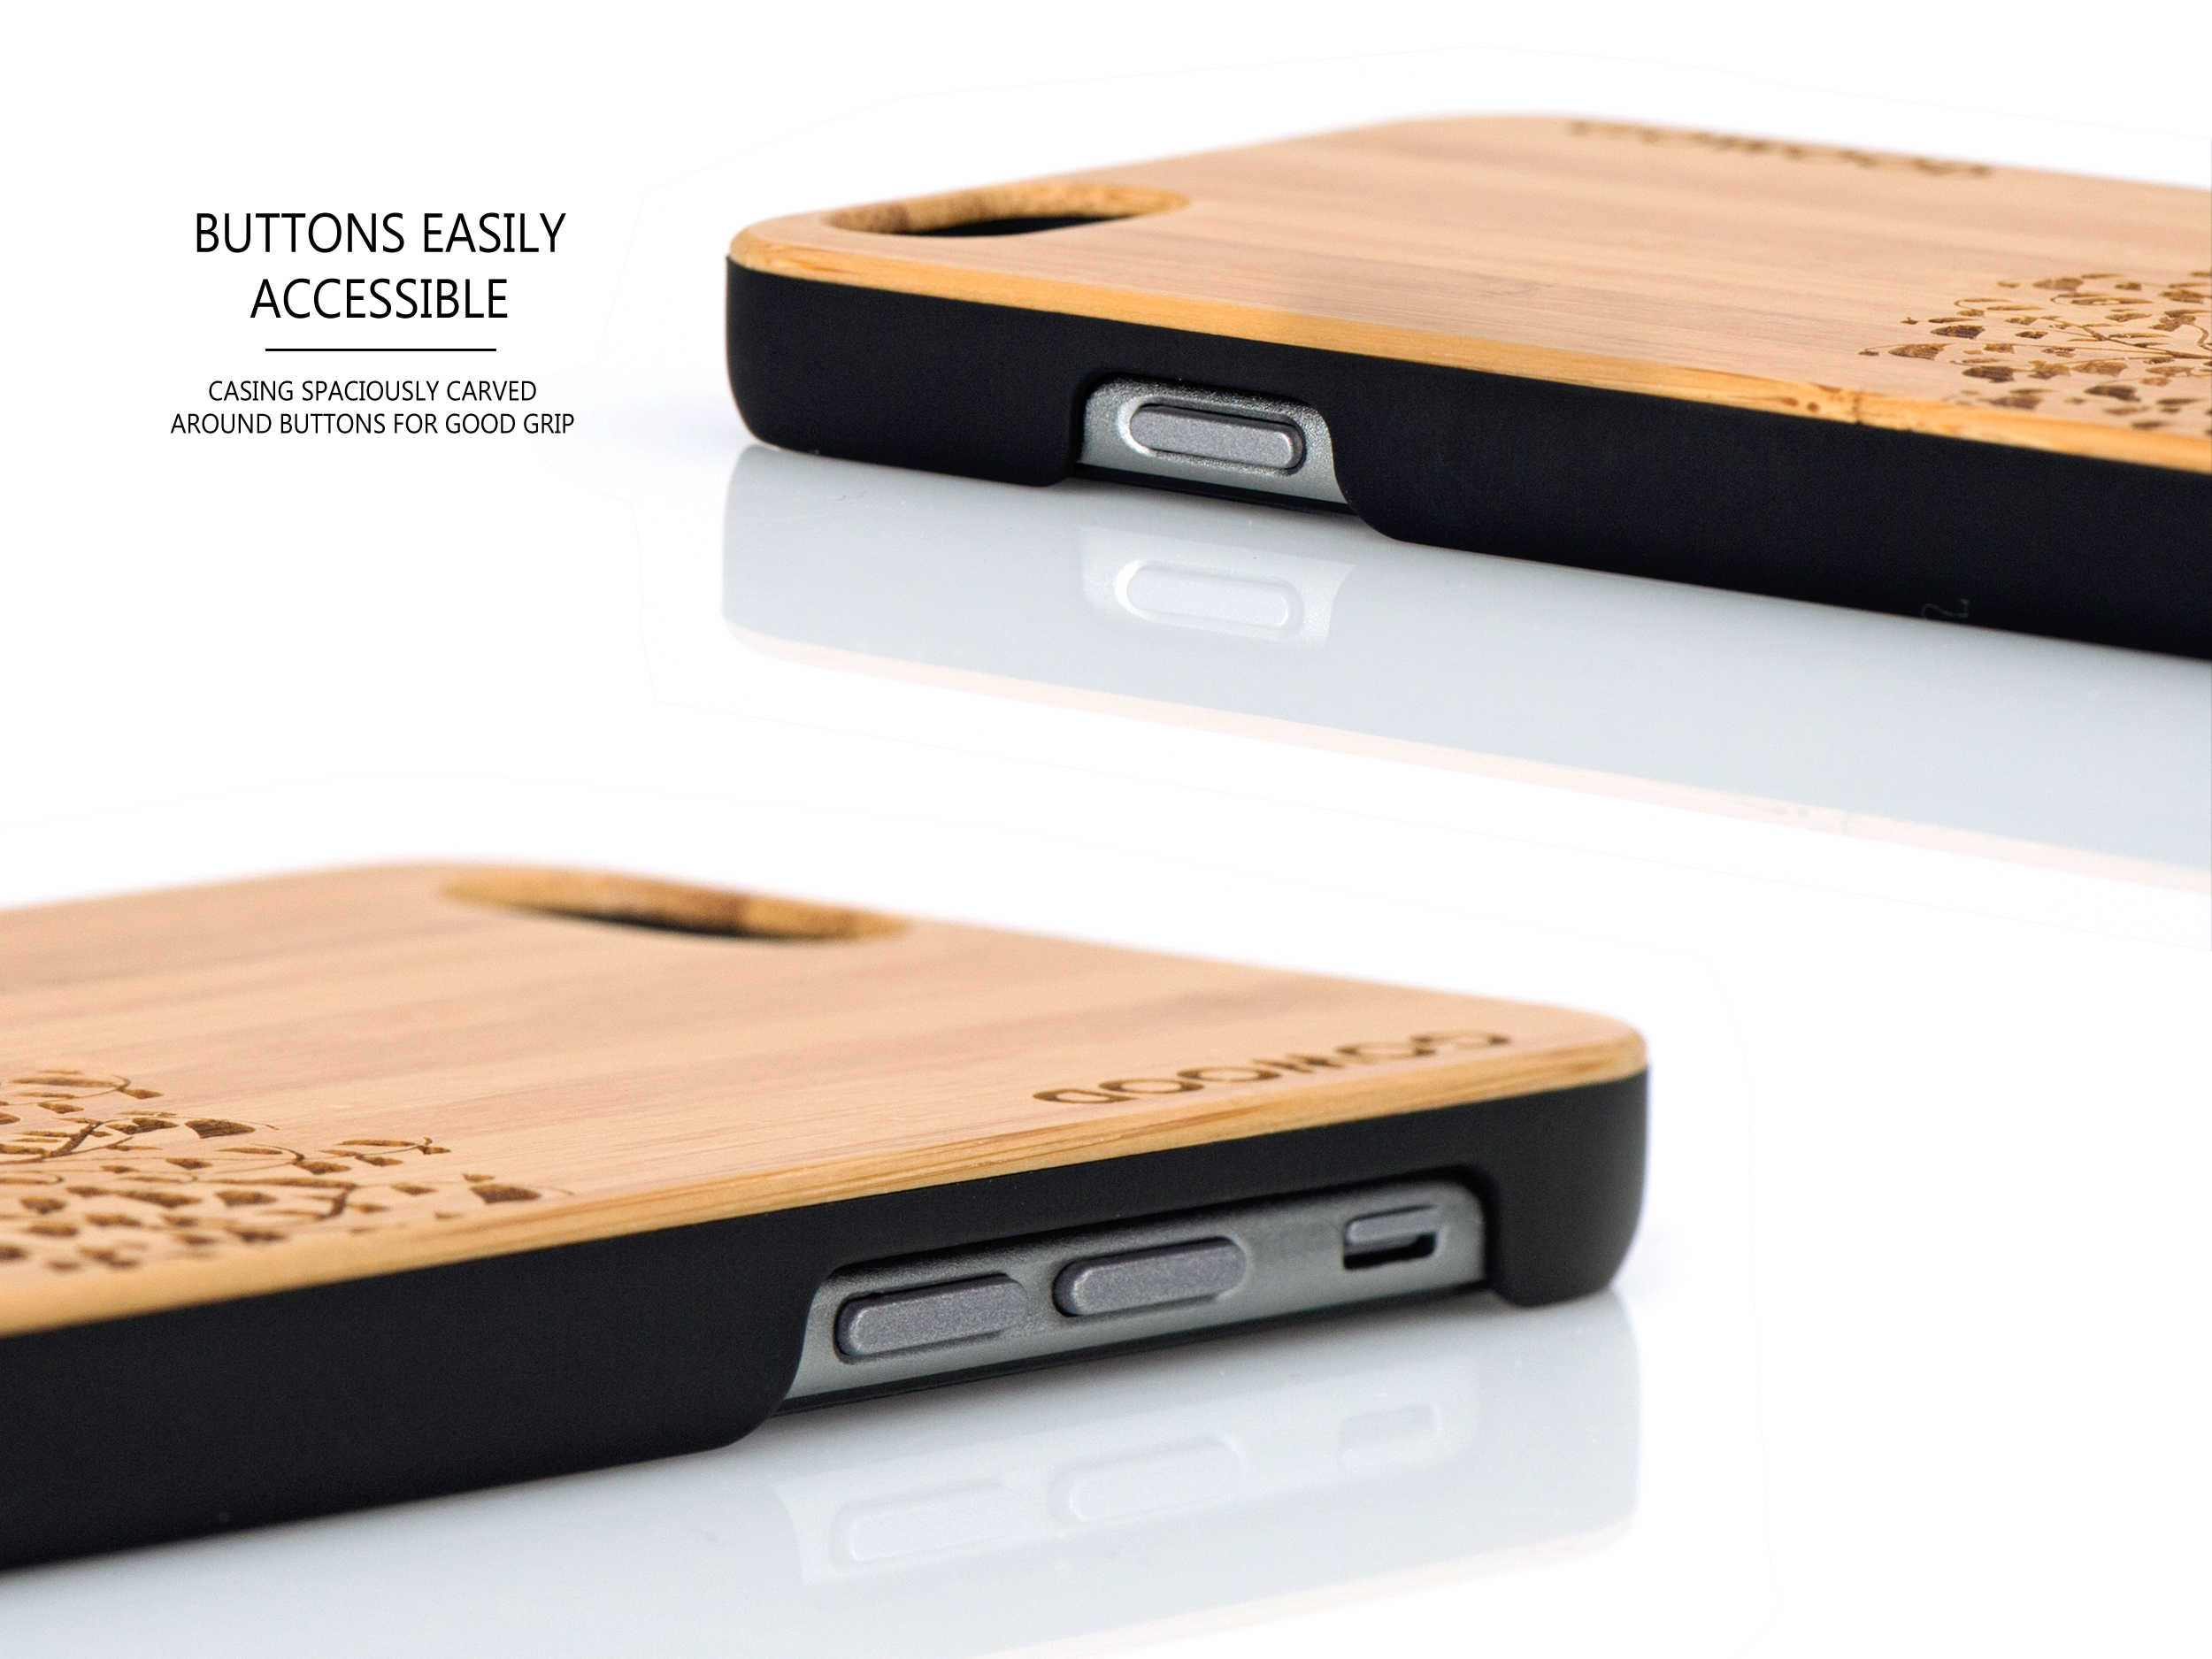 iPhone 6 case bamboo tree wood buttons